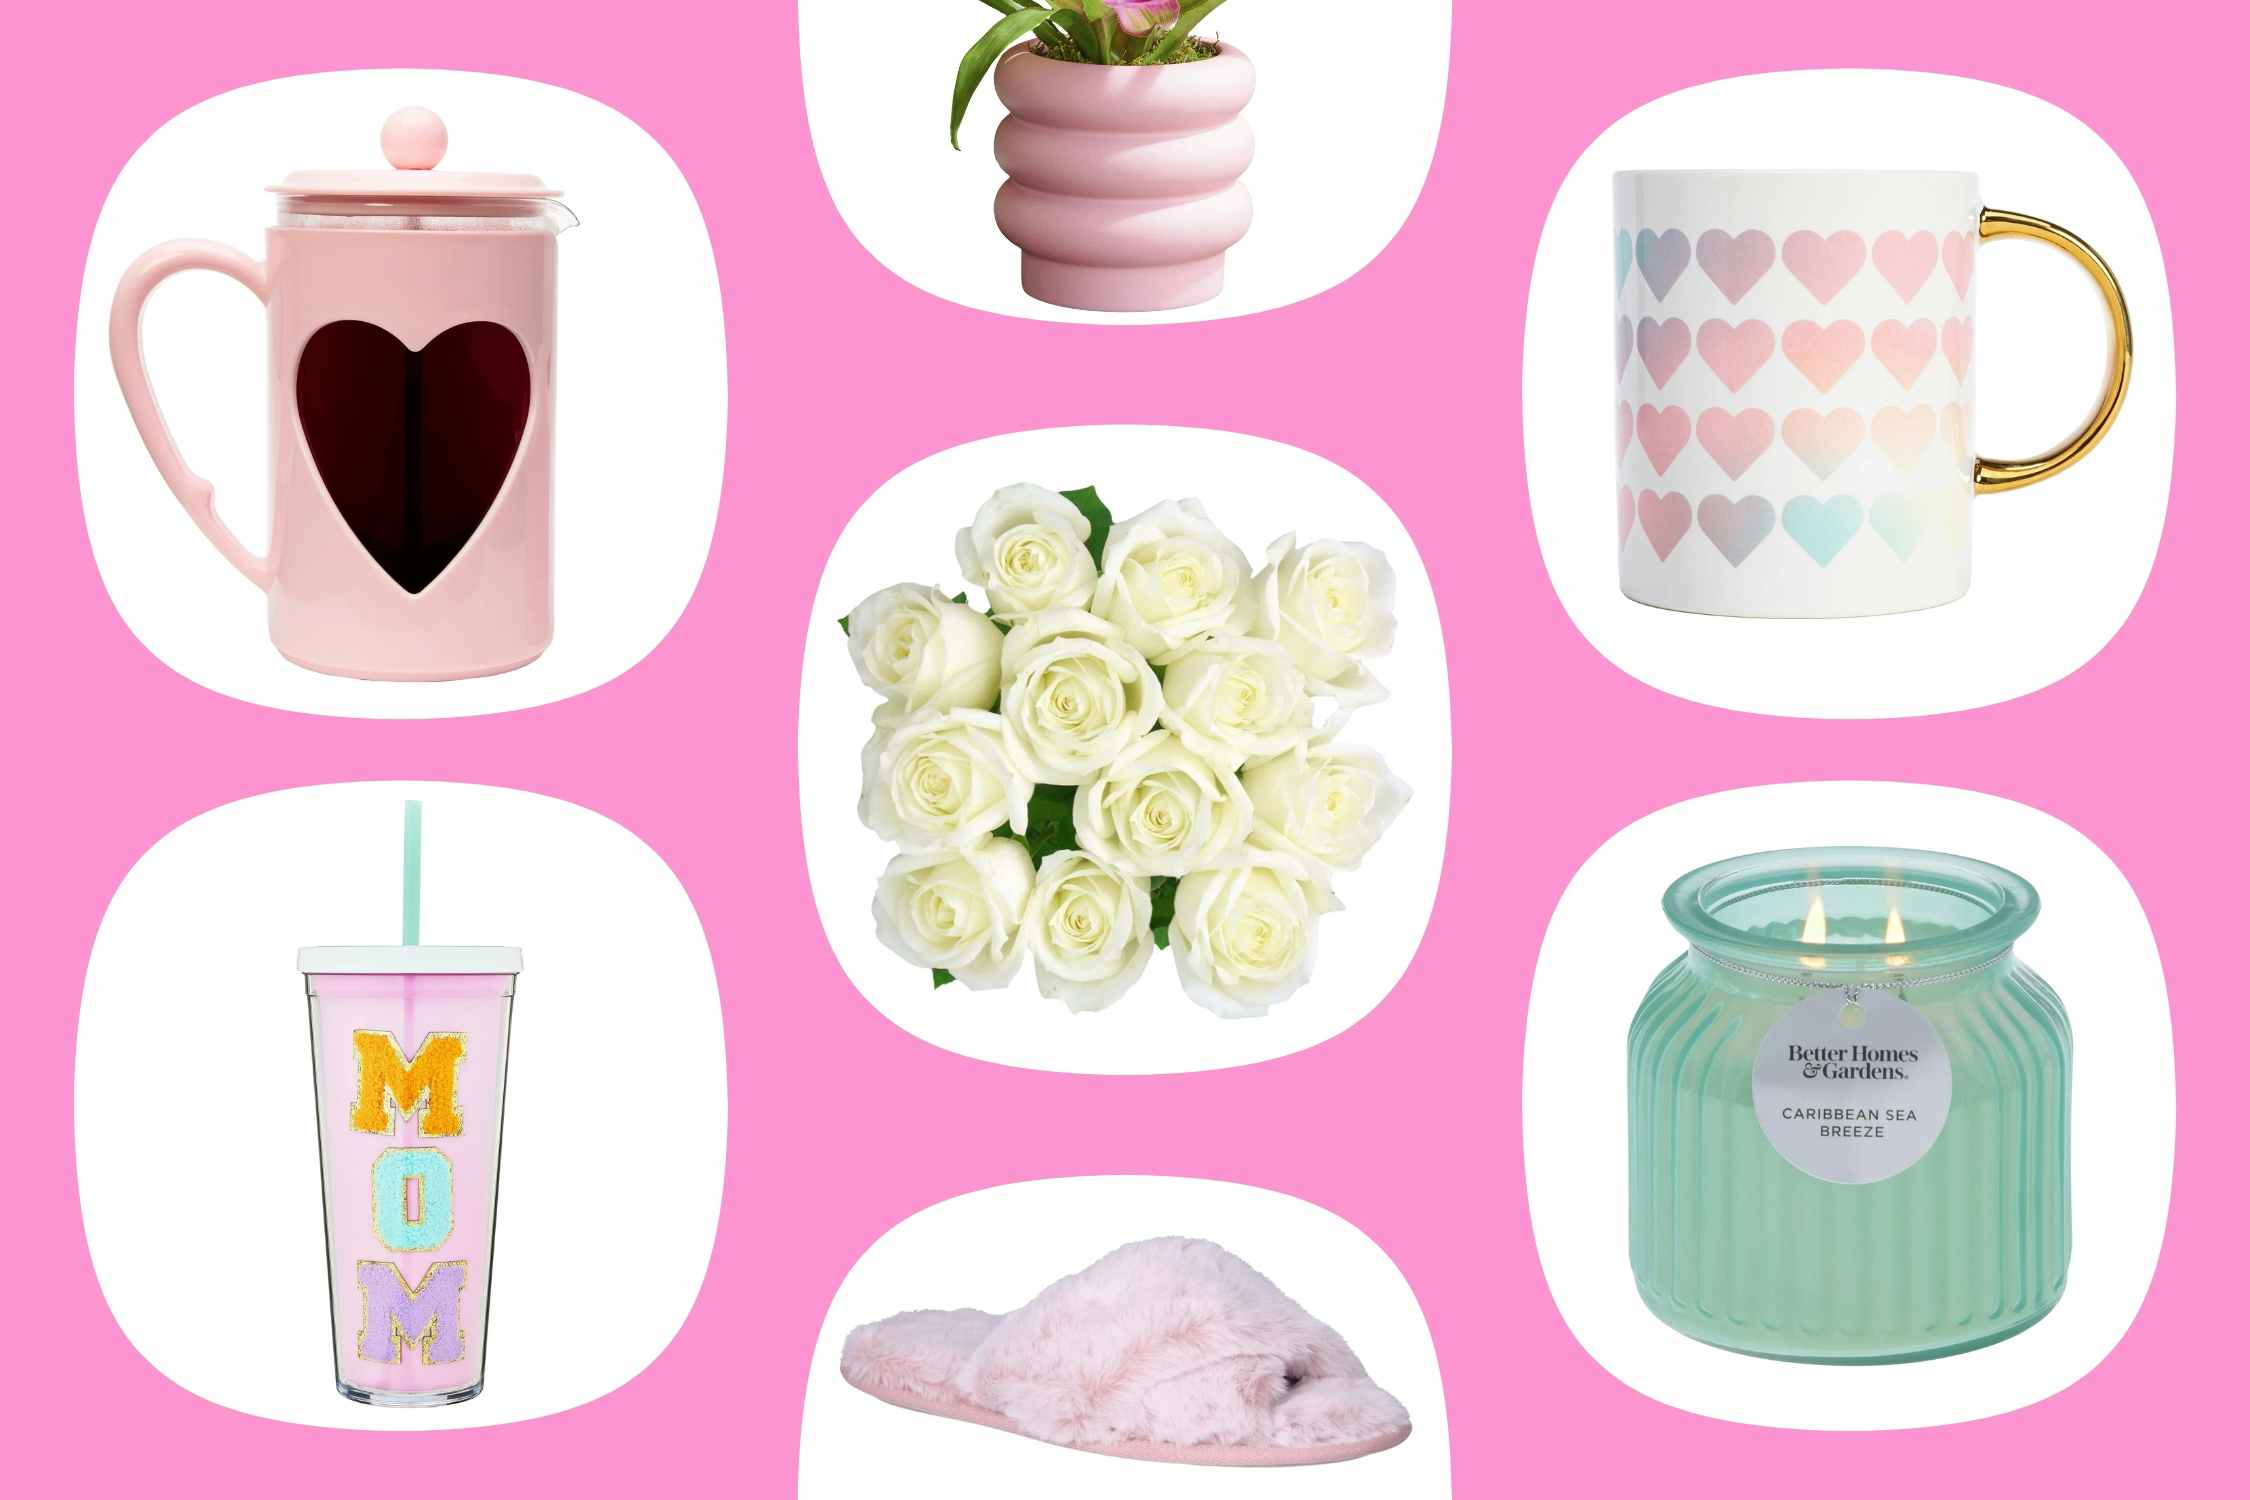 Mother's Day Gifts, Under $10 at Walmart: $5 Candle, $9 Planter, and More